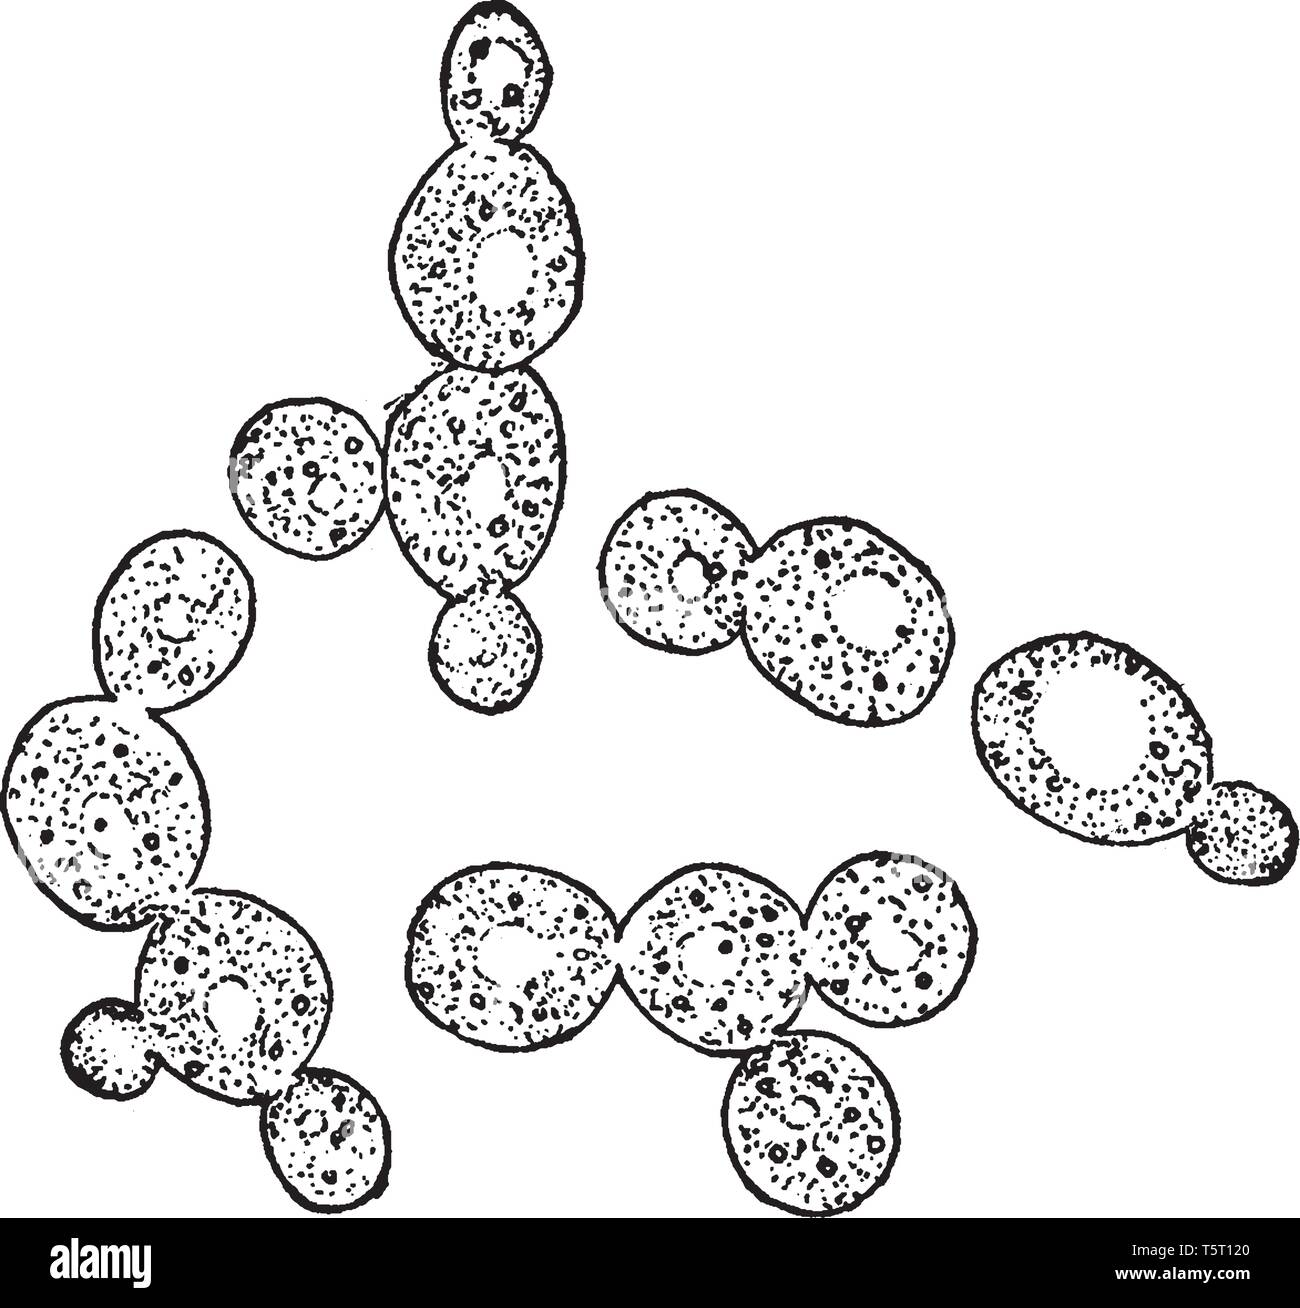 A picture showing Yeast cells which are found in the Juice of Apples, causing the fermentation of Cider, vintage line drawing or engraving illustratio Stock Vector